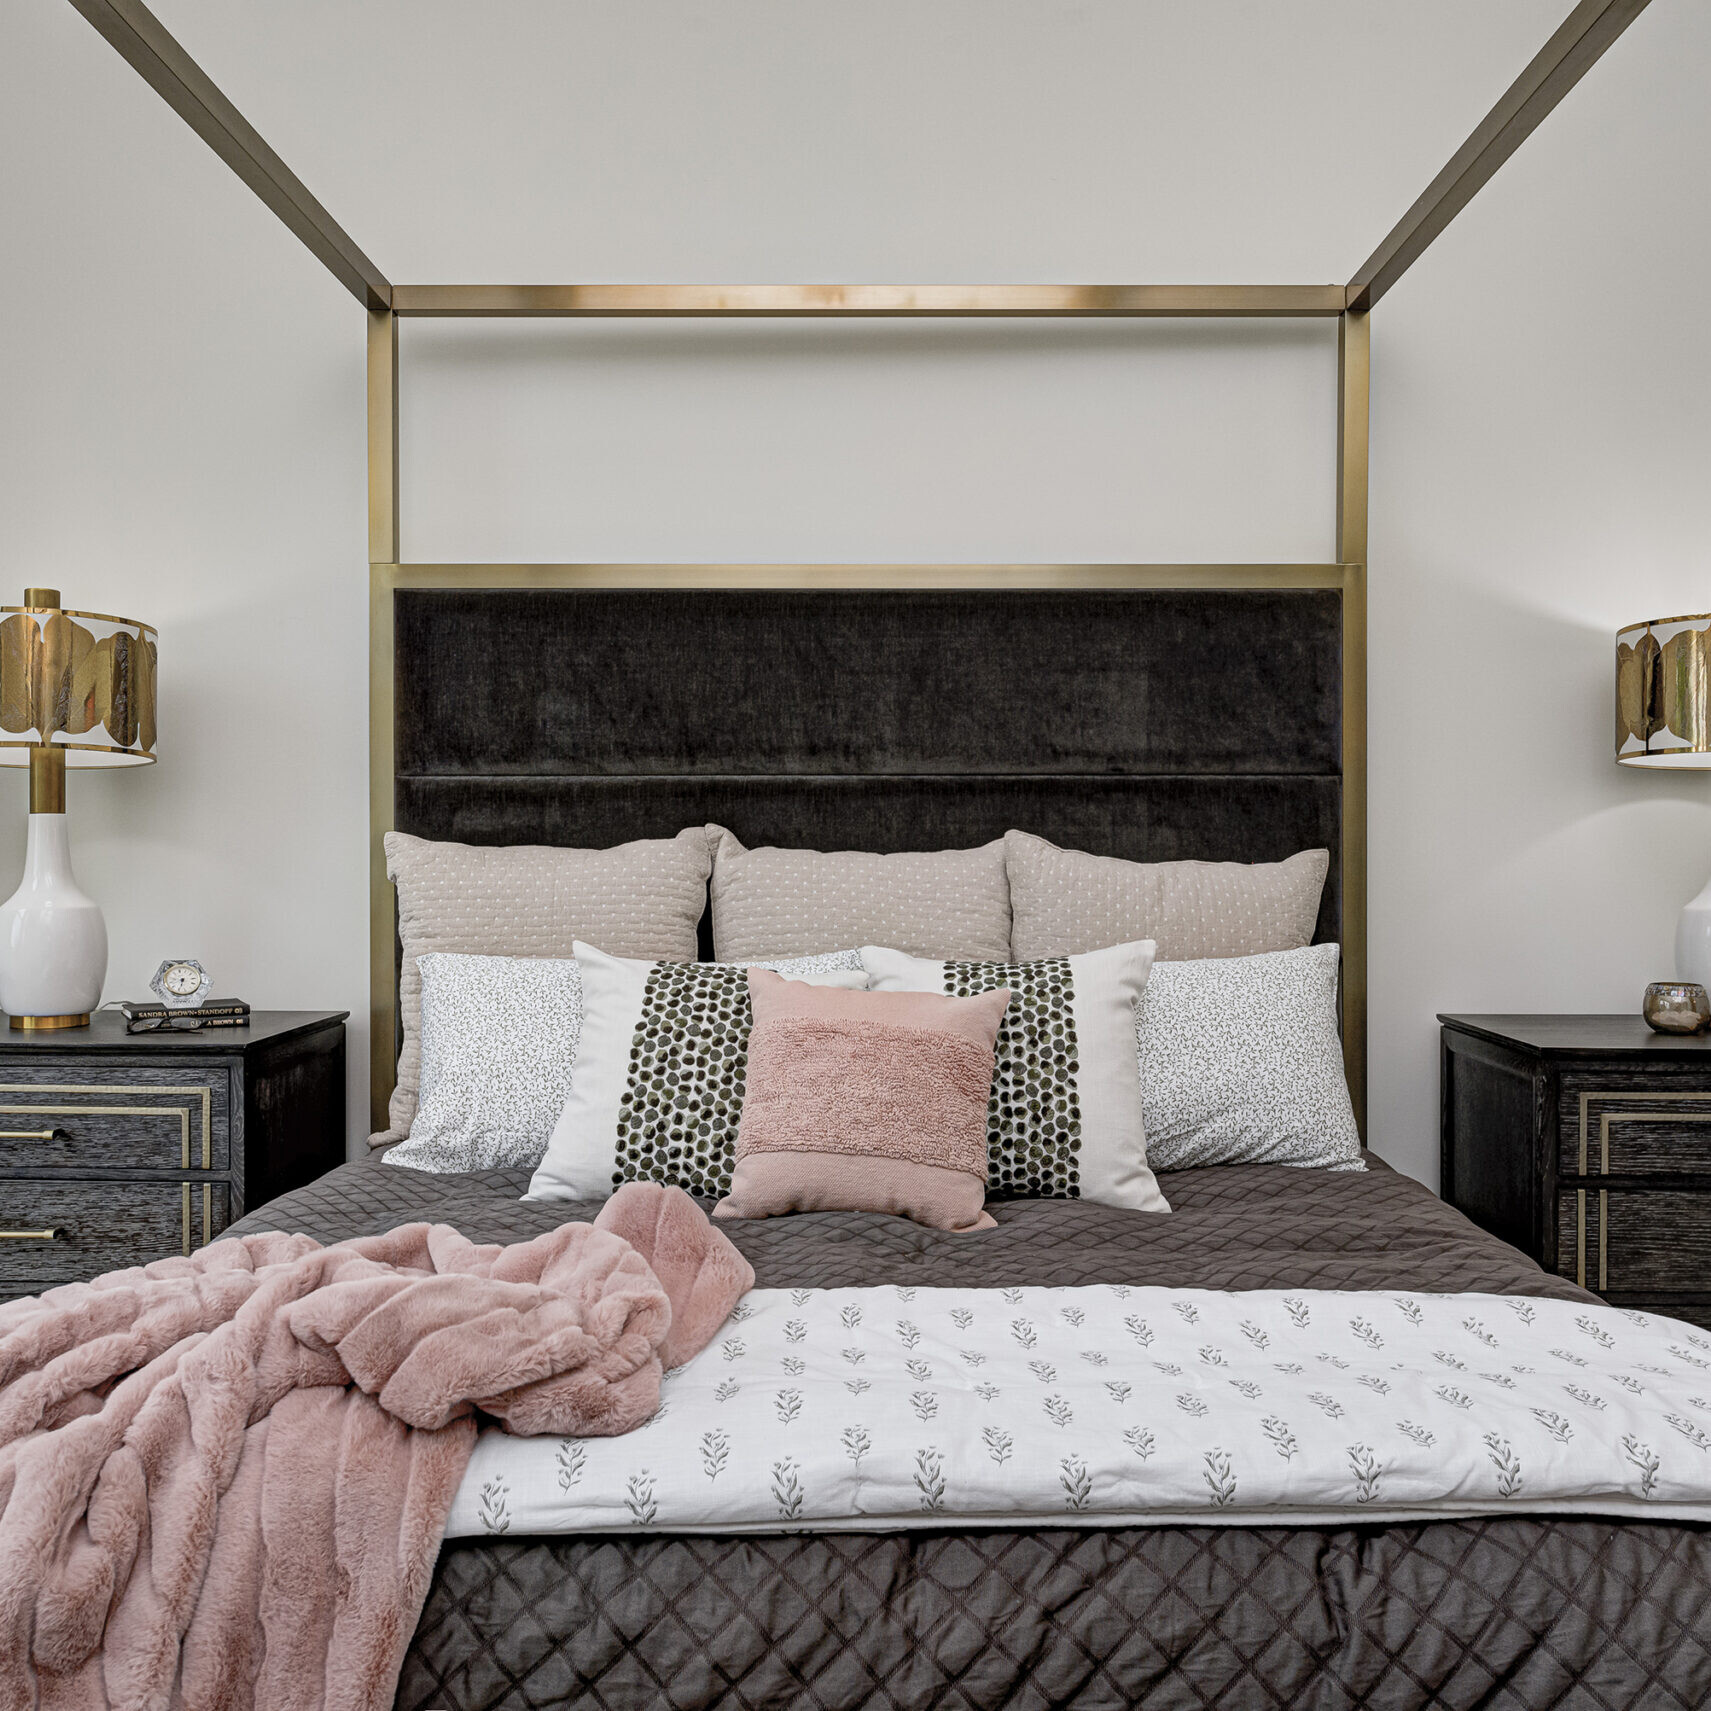 A bedroom with a gold canopy bed and pink pillows, custom built by a leading custom home builder in Carmel, Indiana.